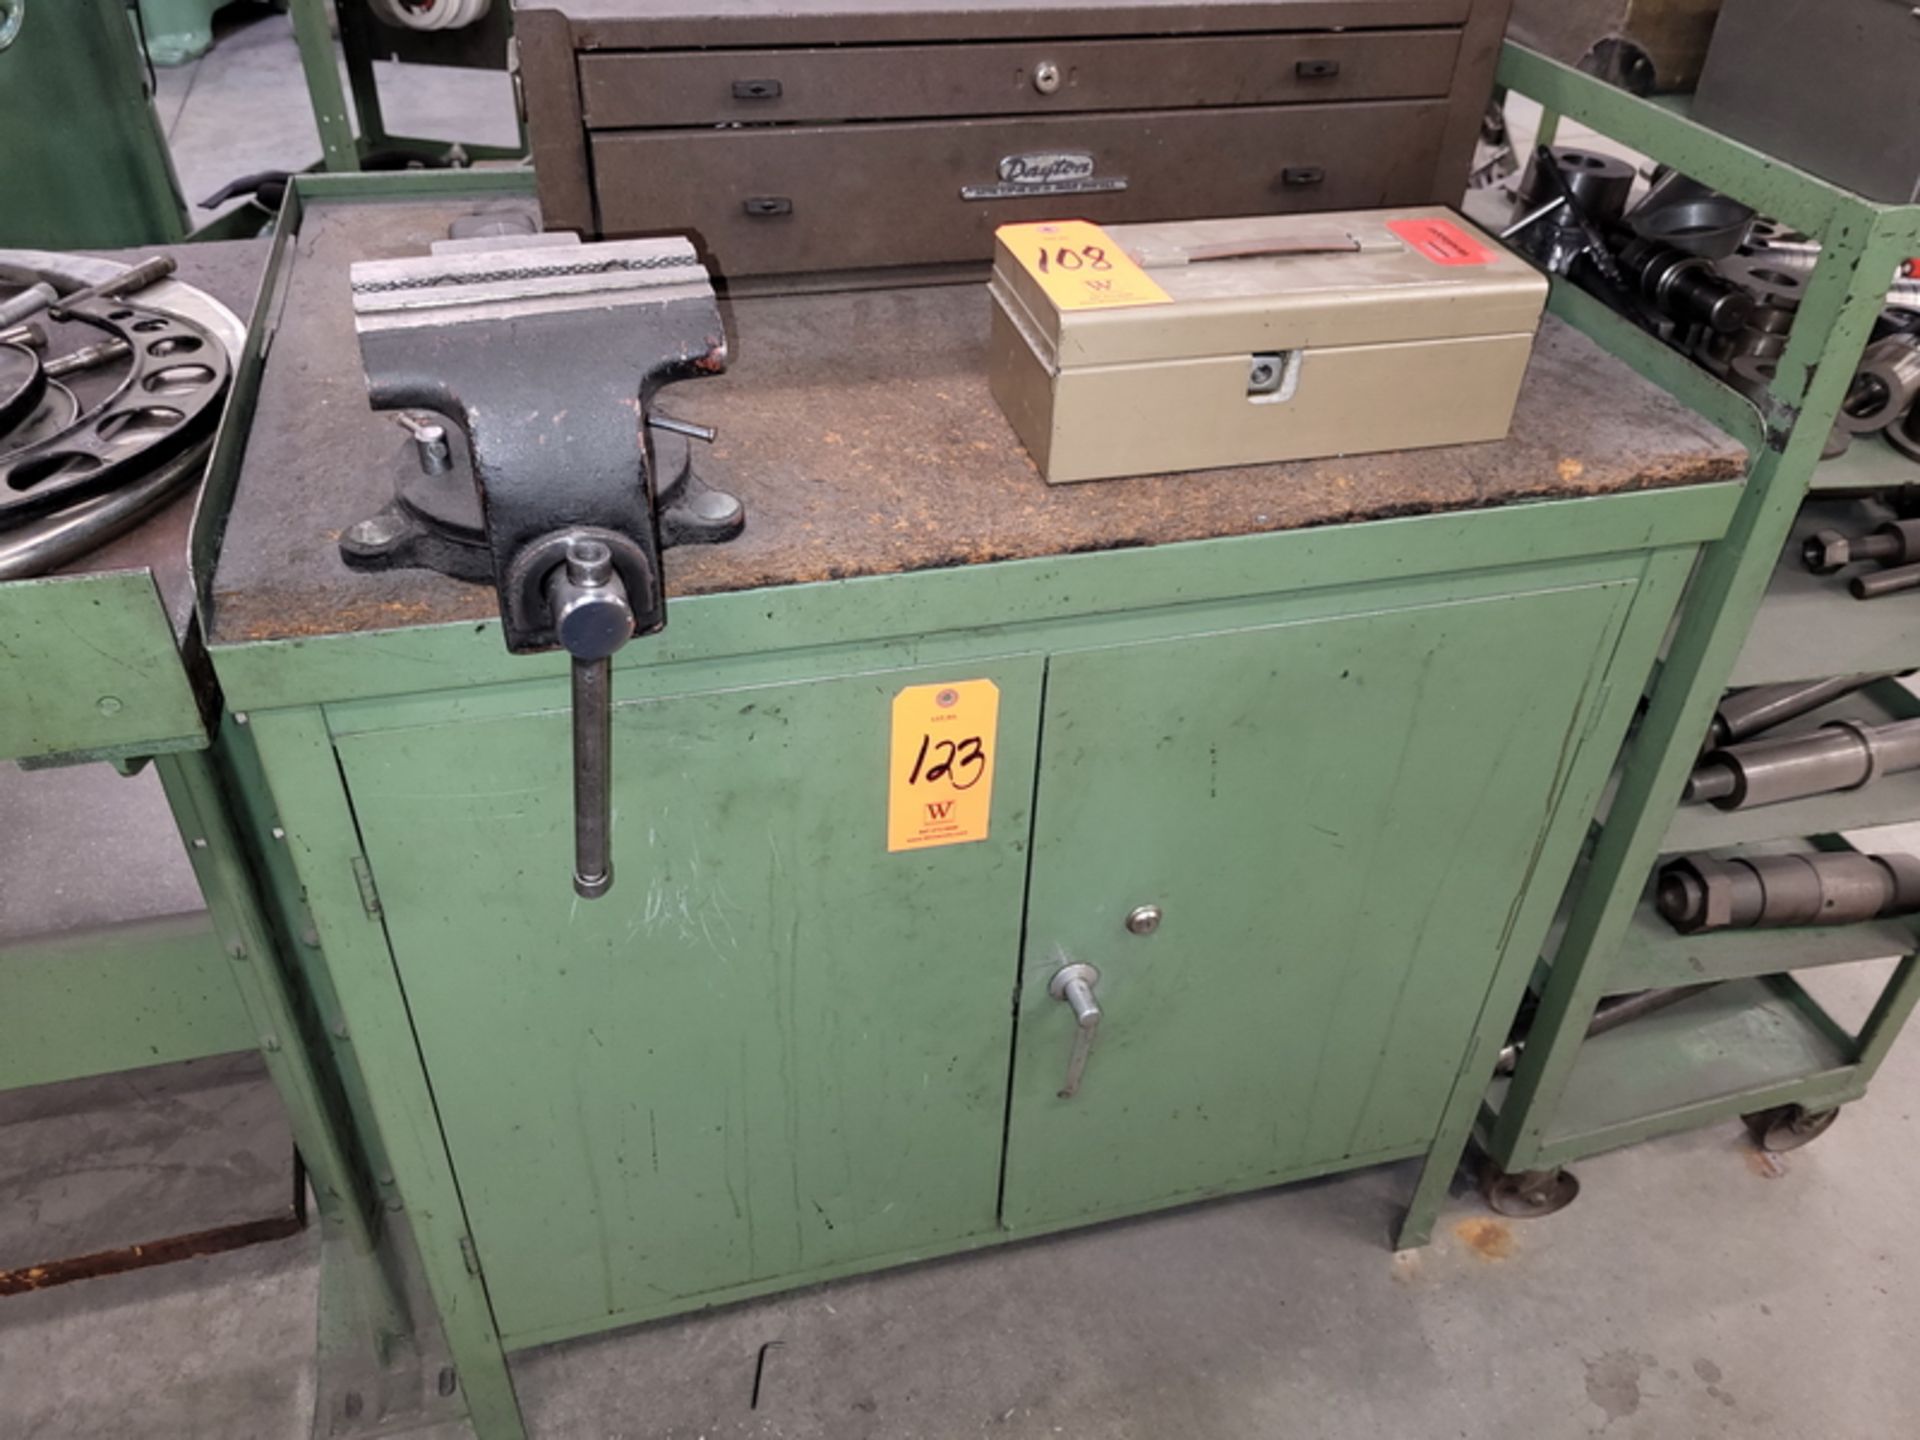 Lot - 2-Door Shop Cabinet & Internal Contents; Includes Attached 6 in. Bench Vise & Used Grinding